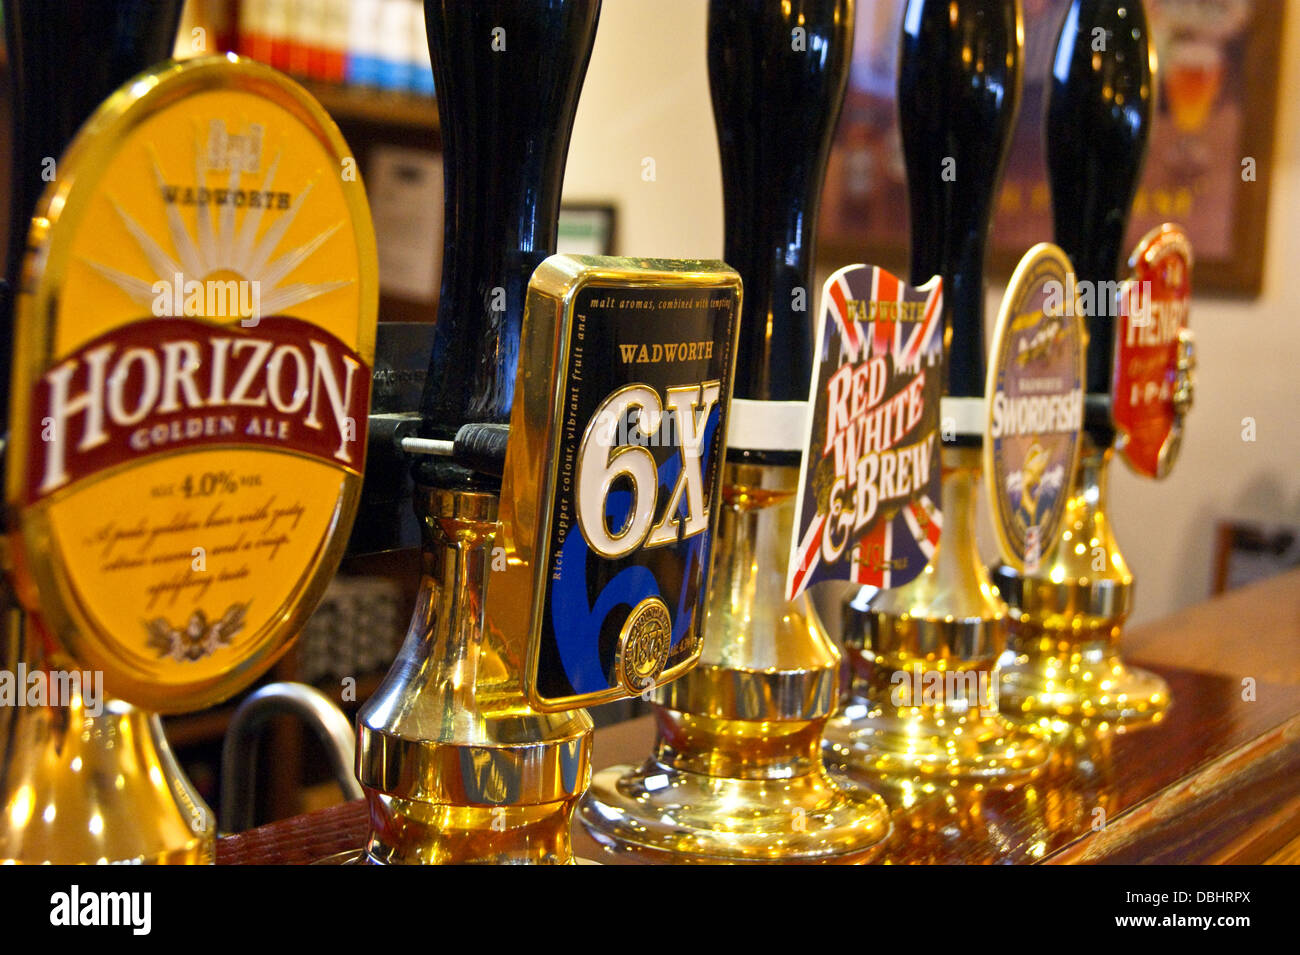 Wadworth of Devizes real ale handpumps and pump clips on a pub bar Stock Photo